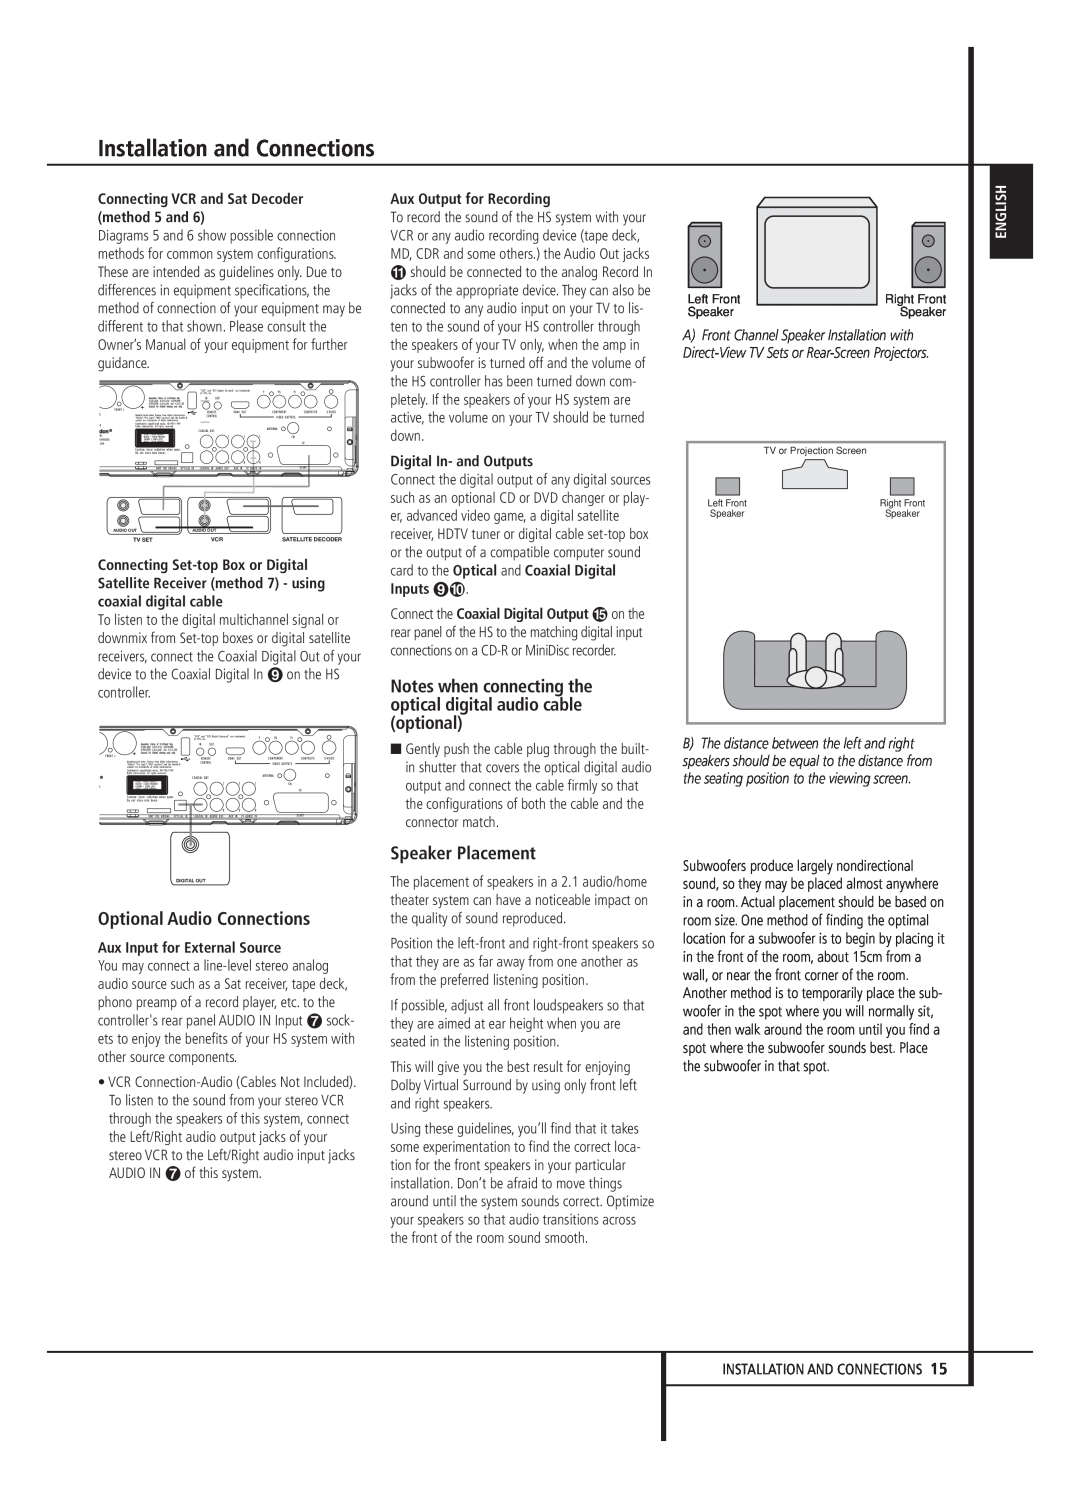 Harman-Kardon HS 250 owner manual Optional Audio Connections, Speaker Placement, Installation and Connections, English 